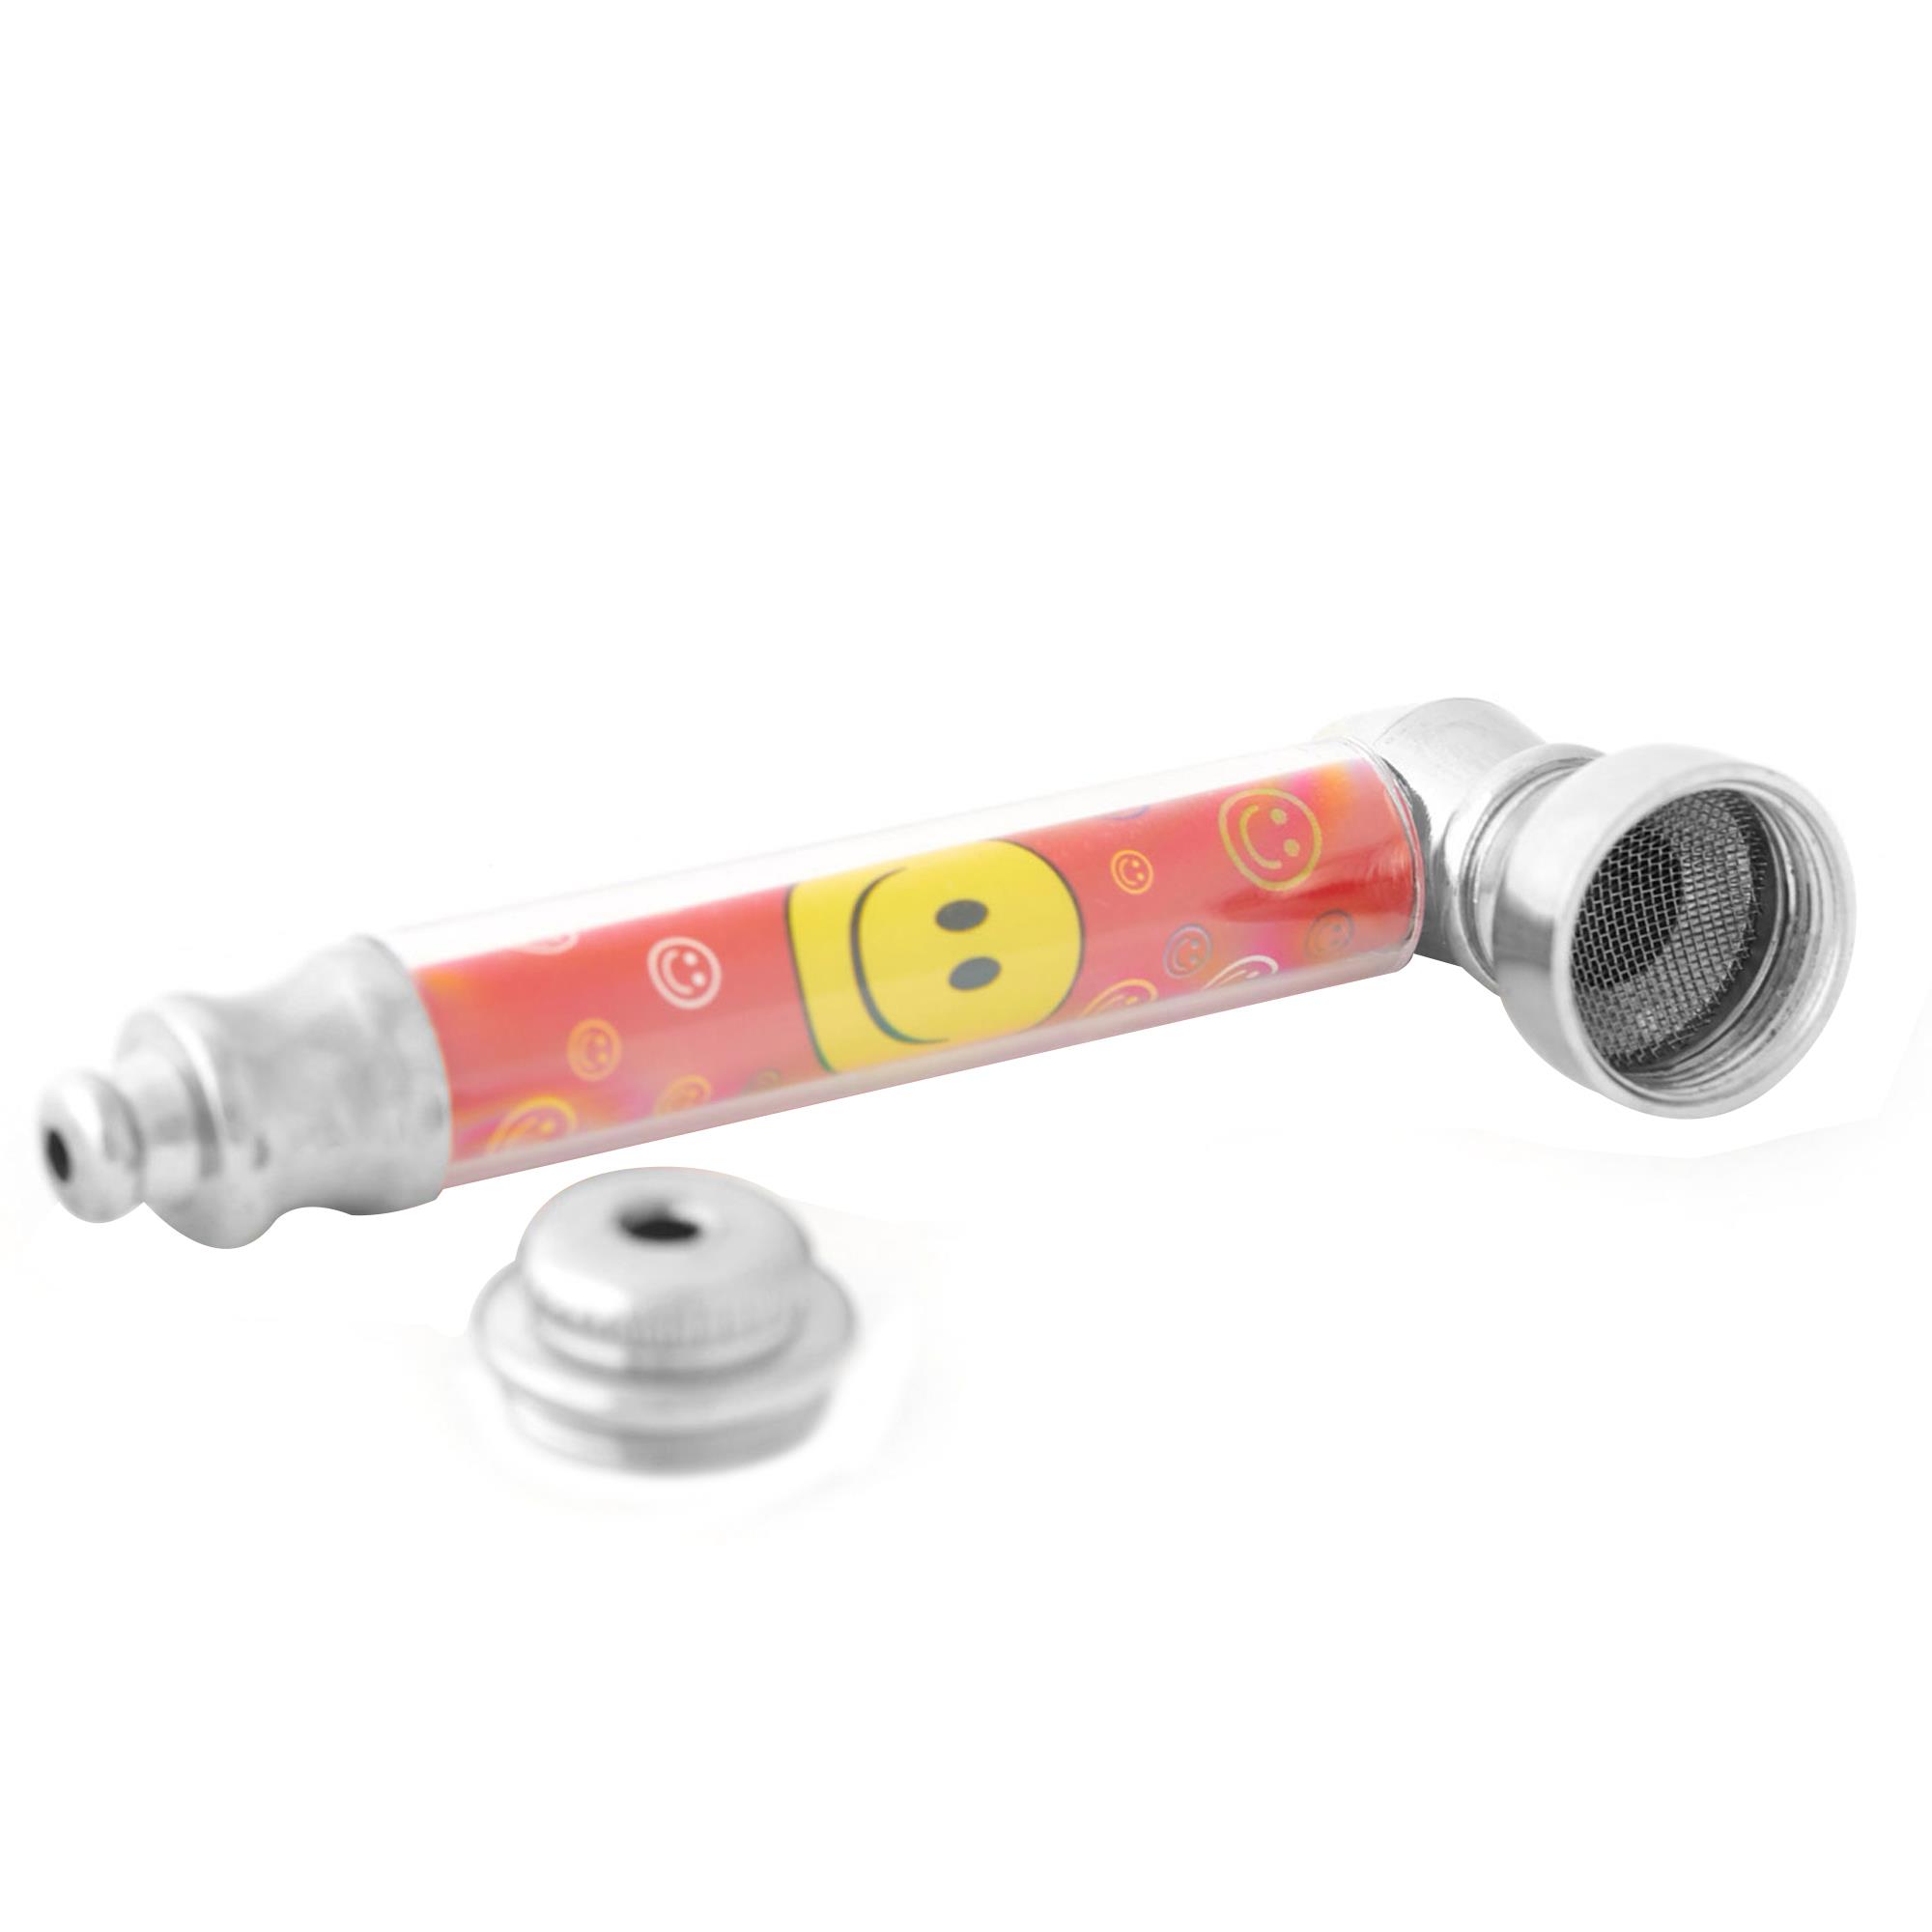 SMILEY FACE METAL PIPE